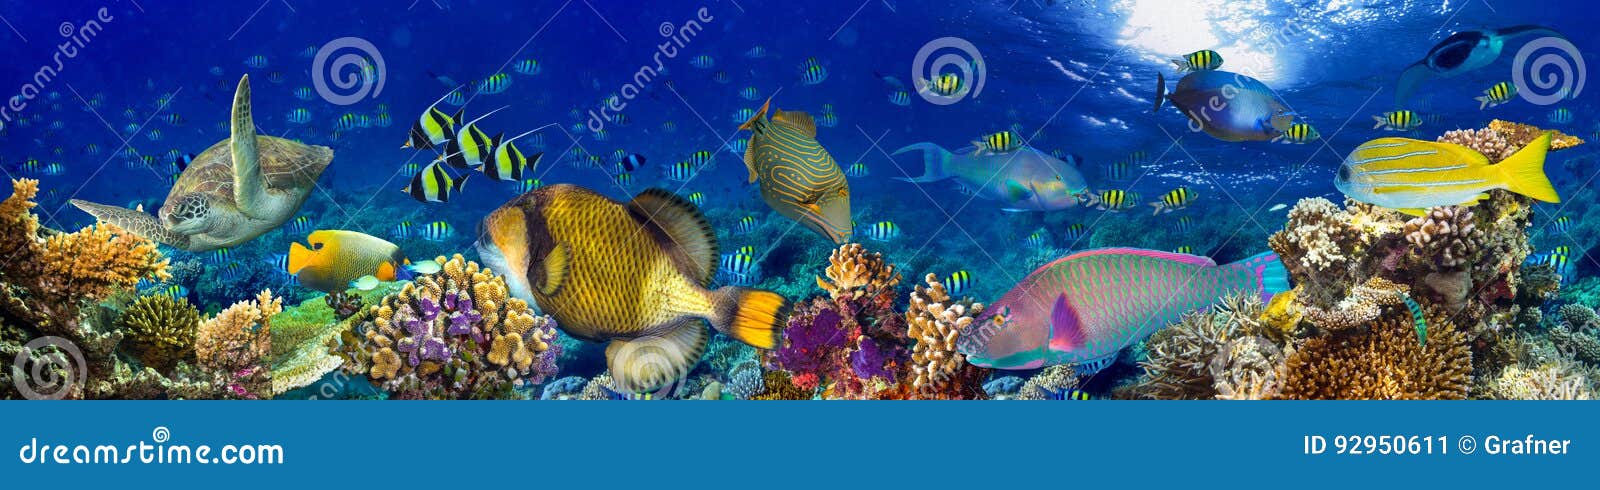 underwater coral reef landscape panorama background